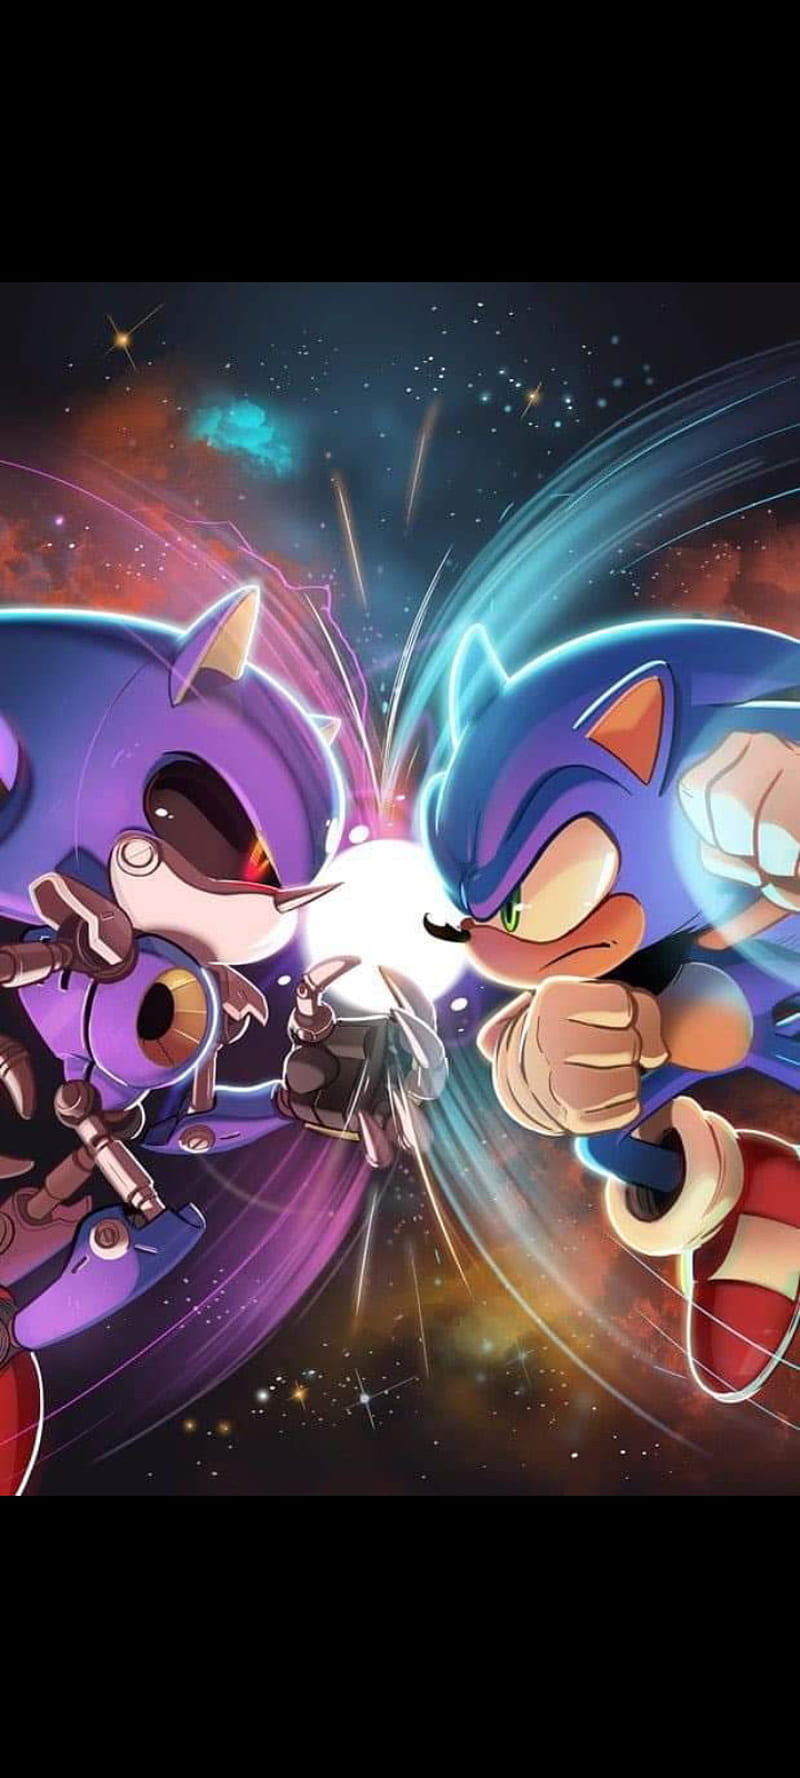 Sonic Frontiers Artwork Version 2 Wallpaper - Cat with Monocle